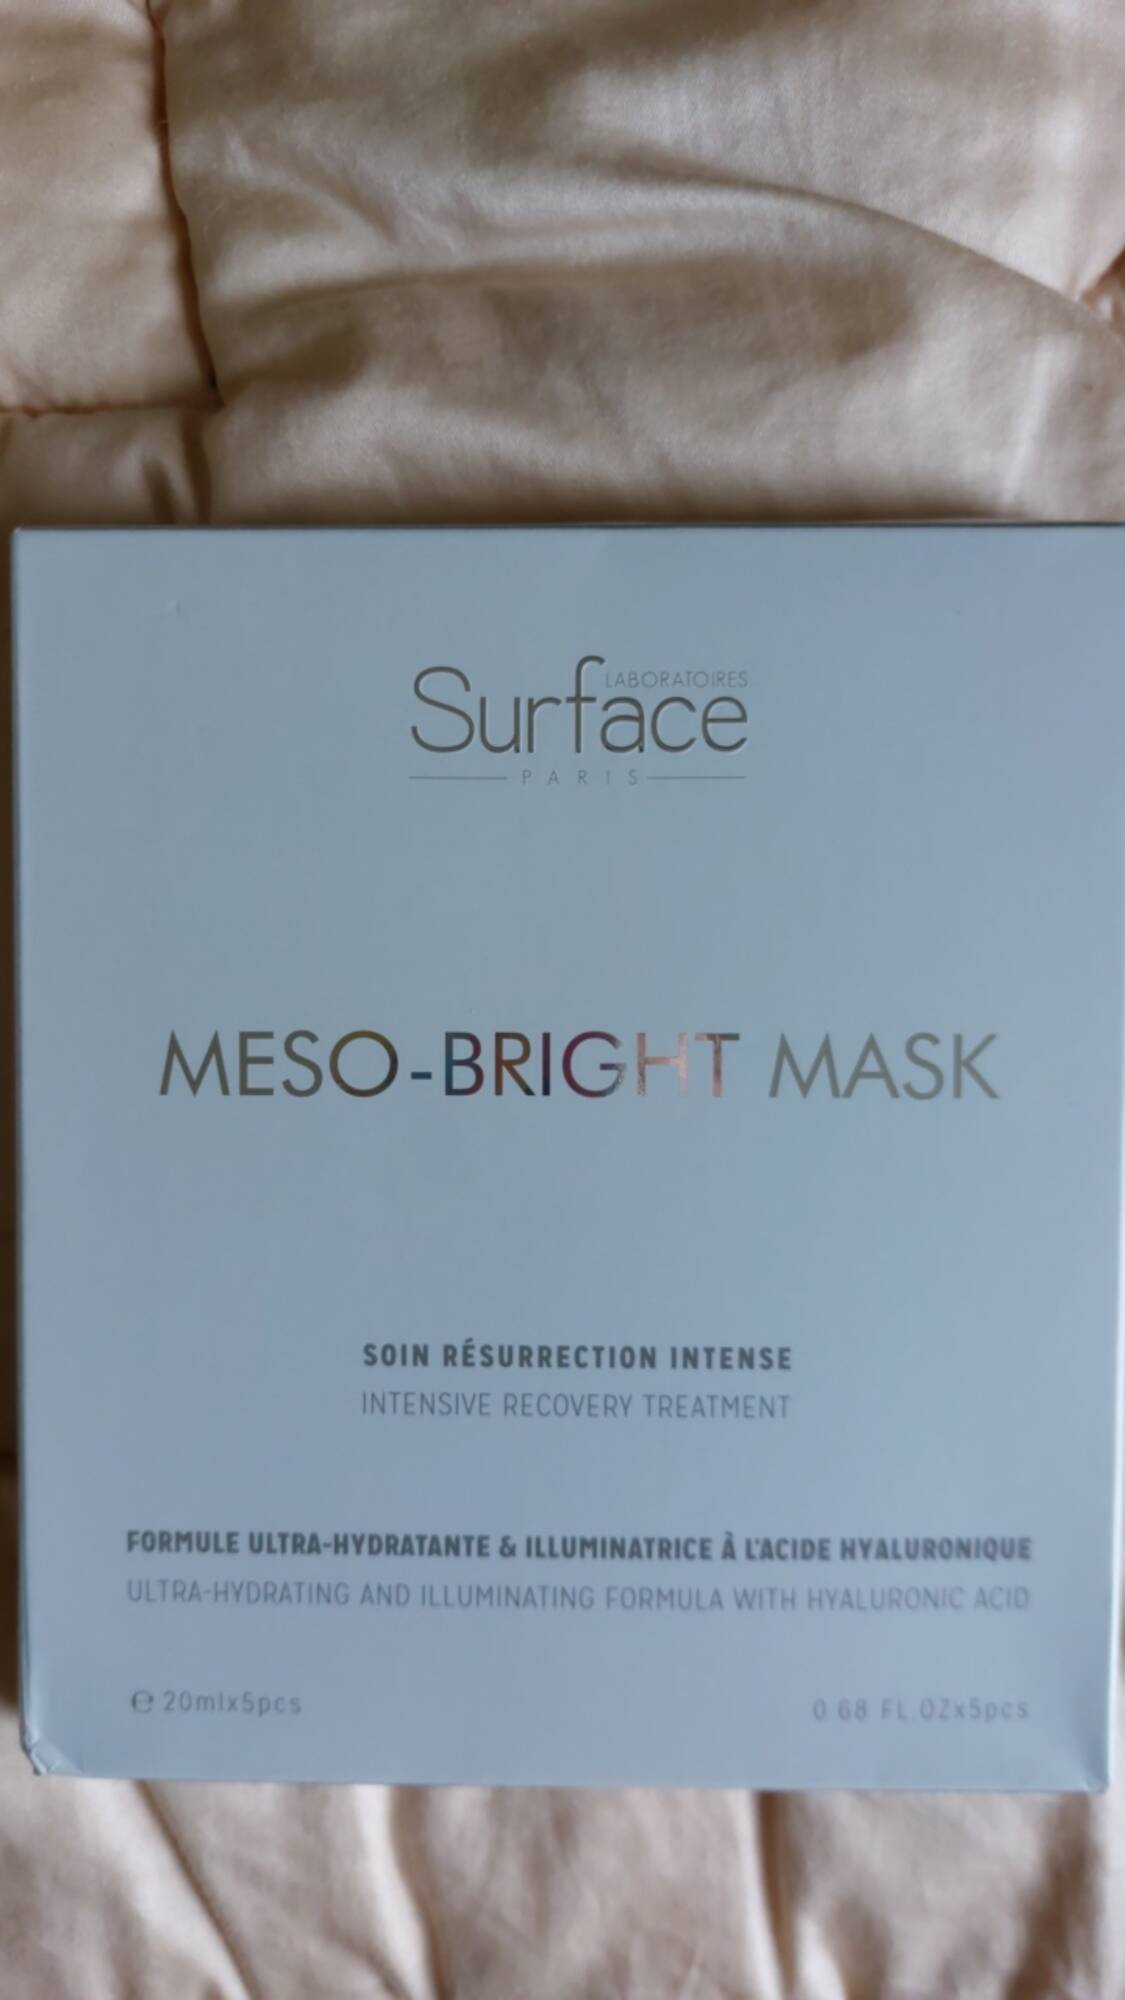 SURFACE - Meso-bright mask